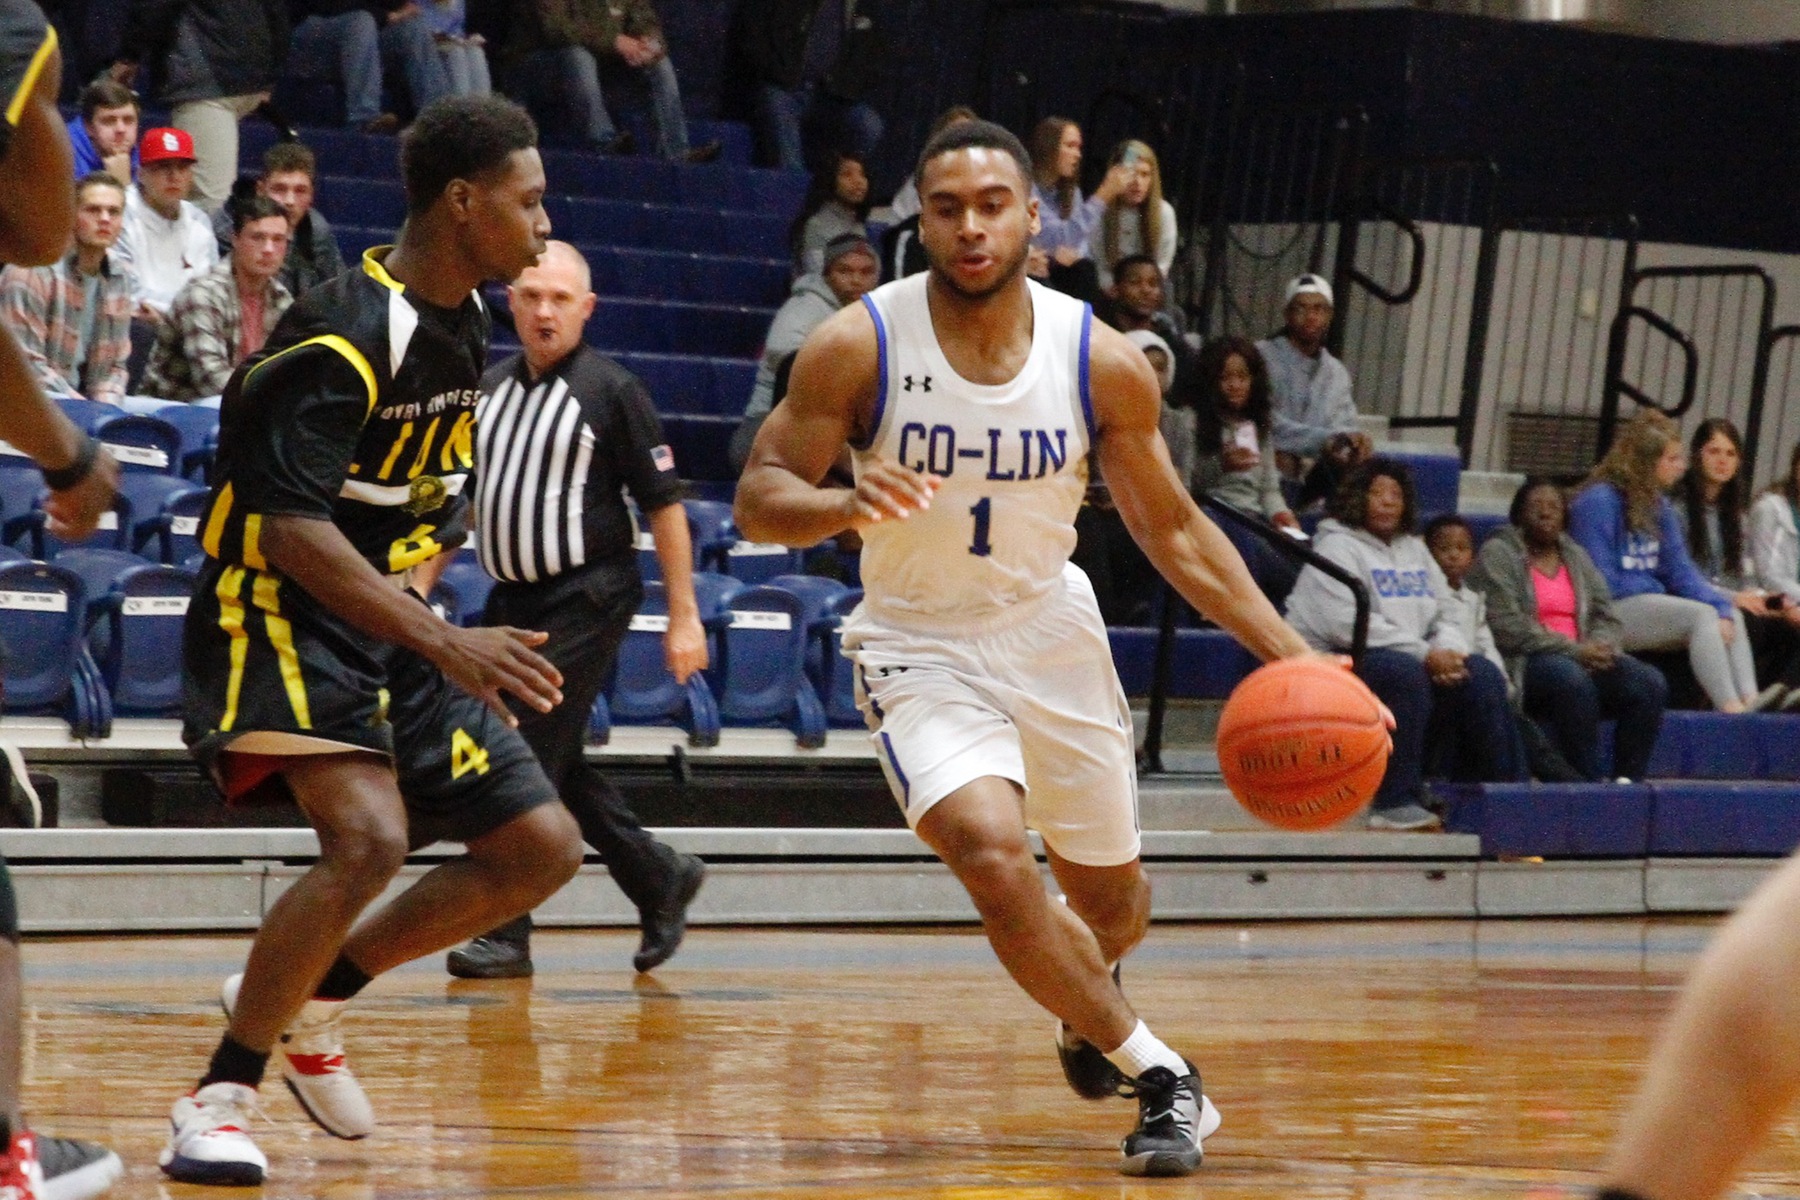 Co-Lin falls to ECCC on the road